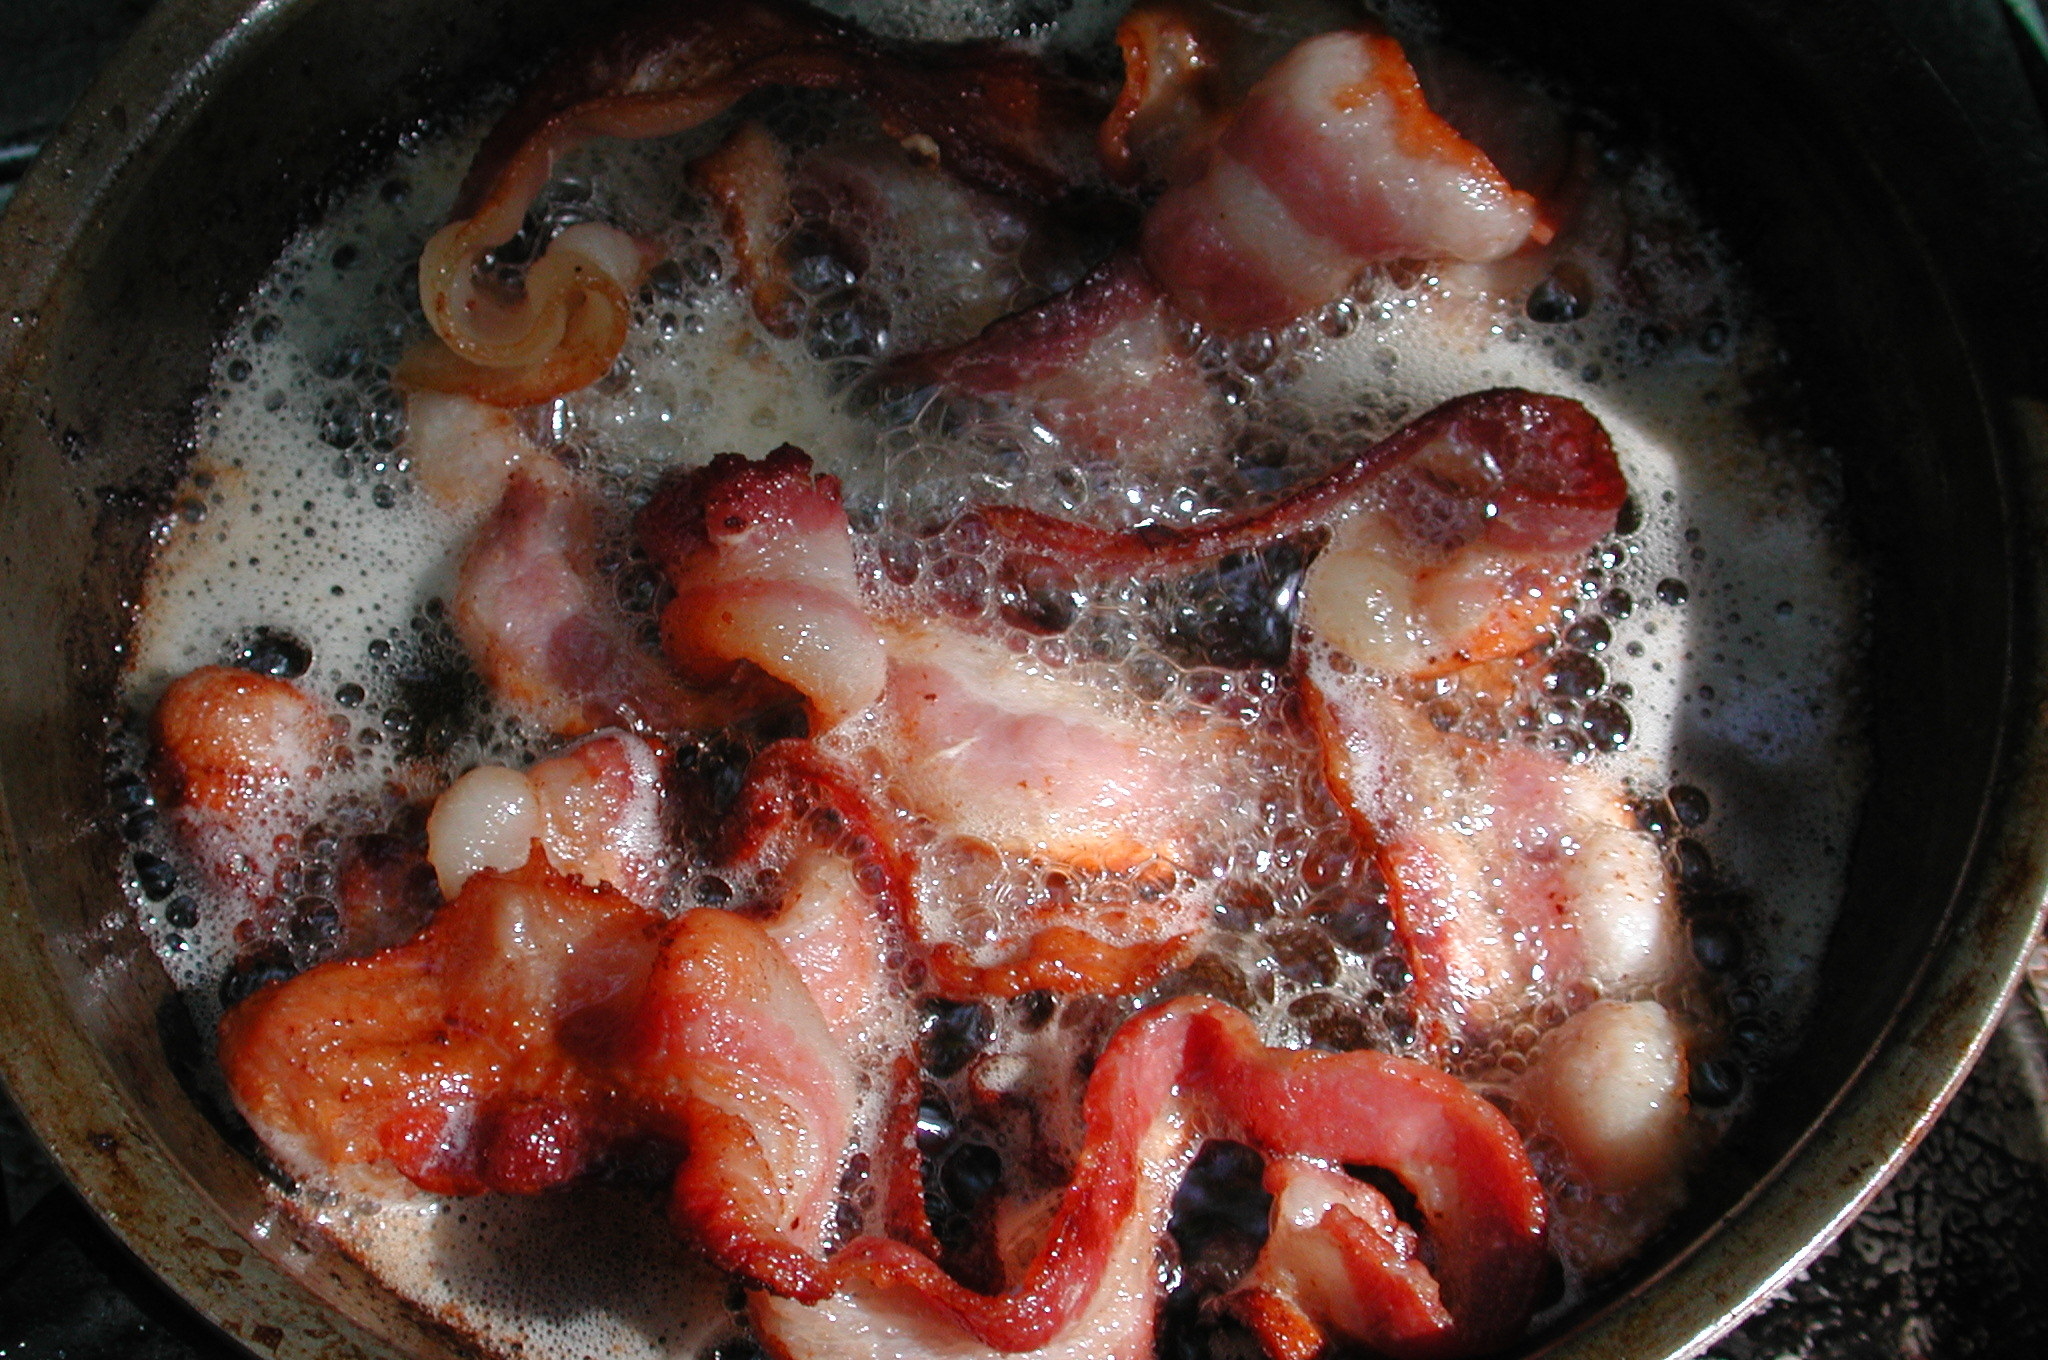 A crowded pan of bacon.